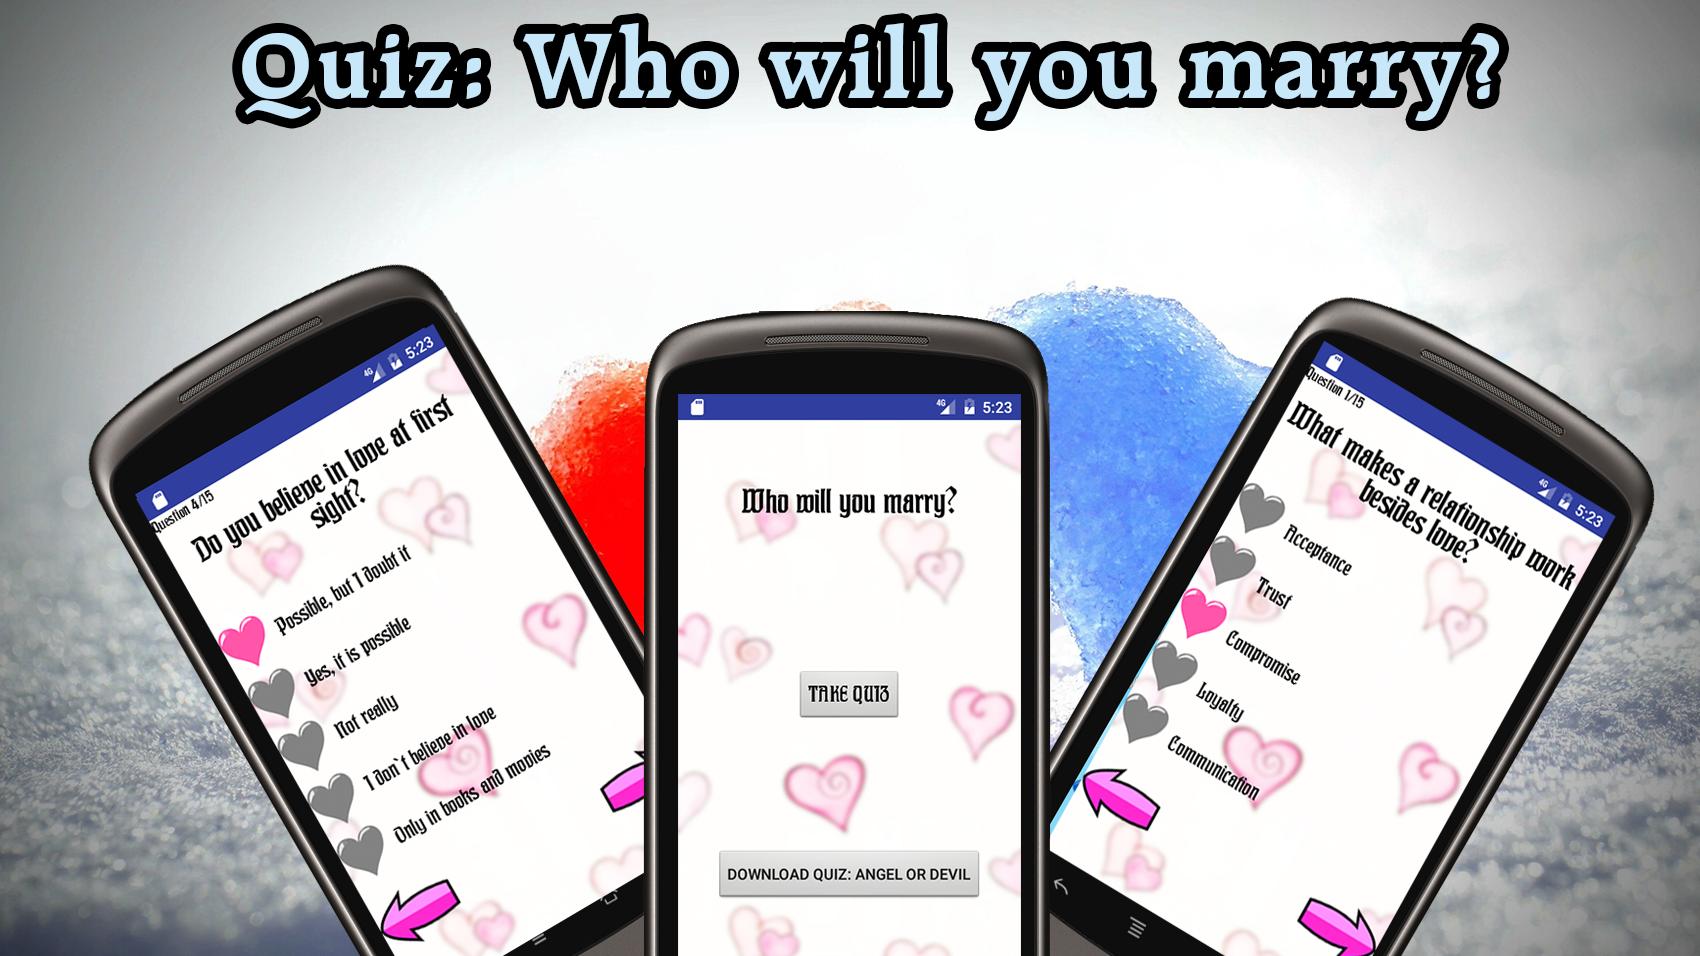 Игры тест твоя. Приложение who. Survey will you Marry Android. Will you Marry me.